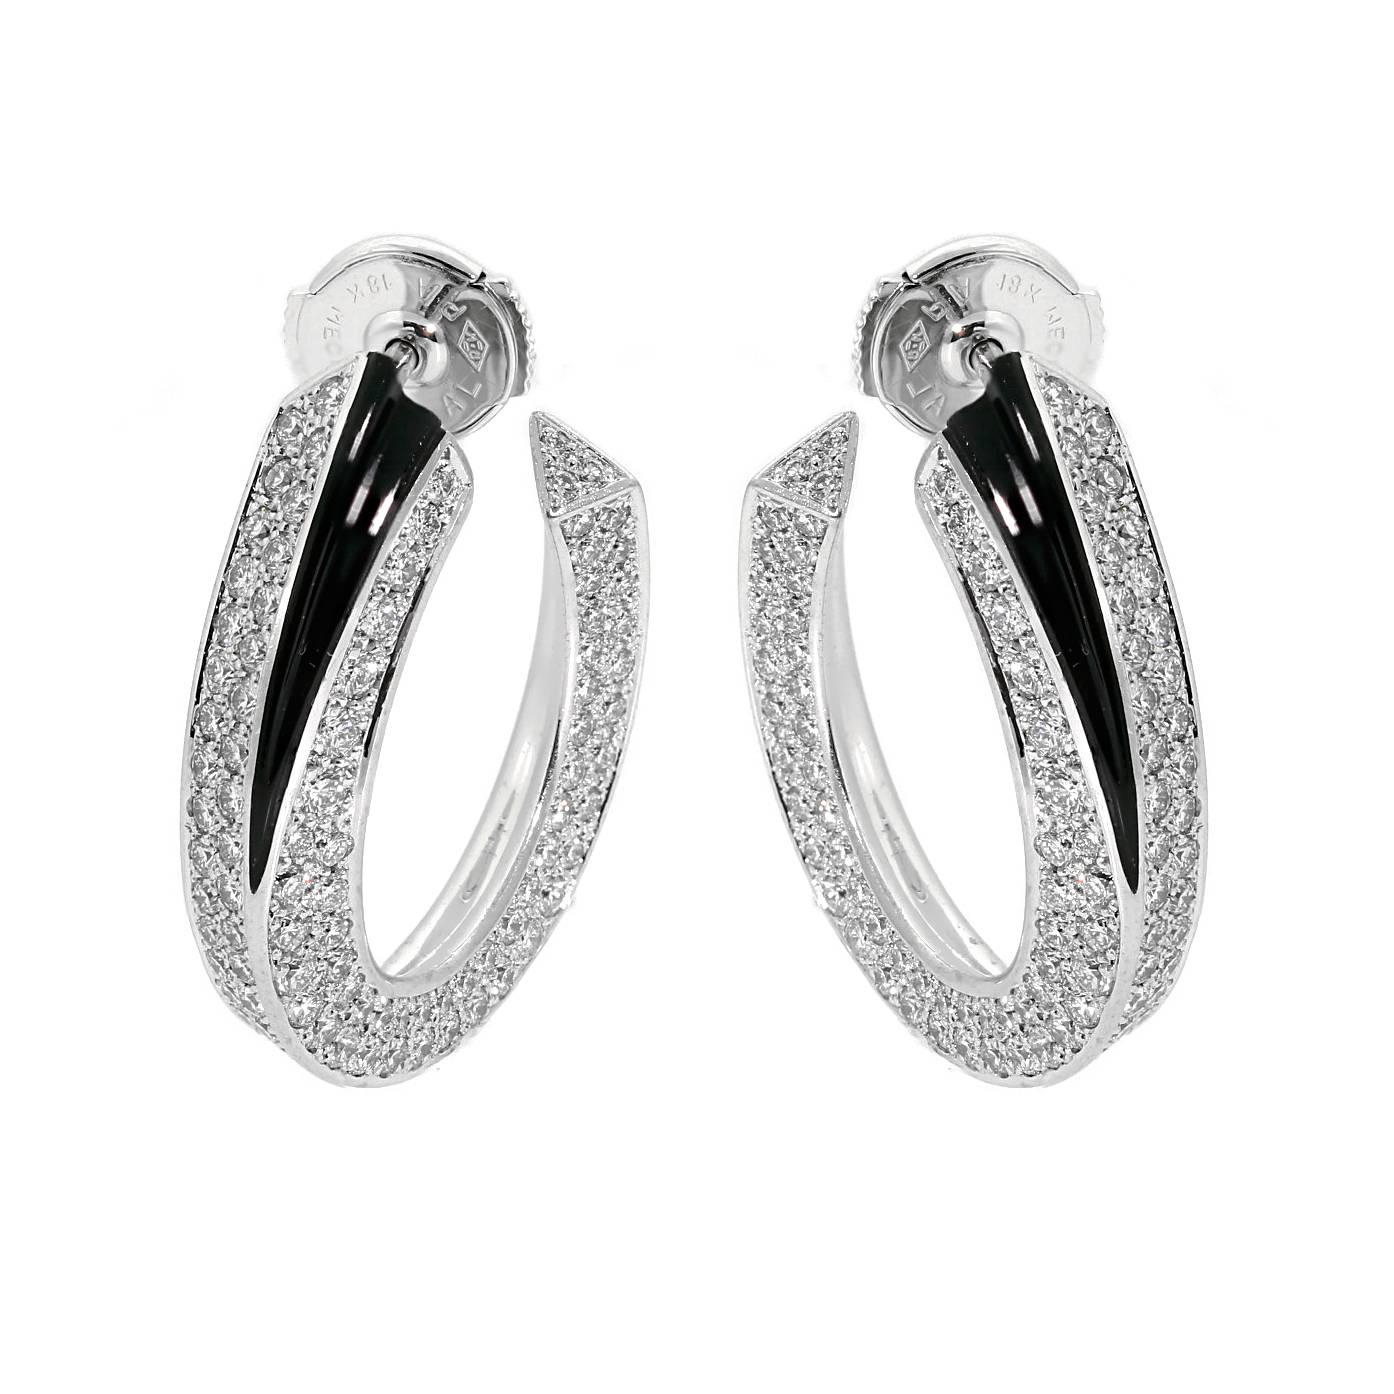 A magnificent pair of Cartier Panthere earrings adorned with 5cts appx of finest Cartier round brilliant cut diamonds set in 18k white gold.

Earring Width: .25